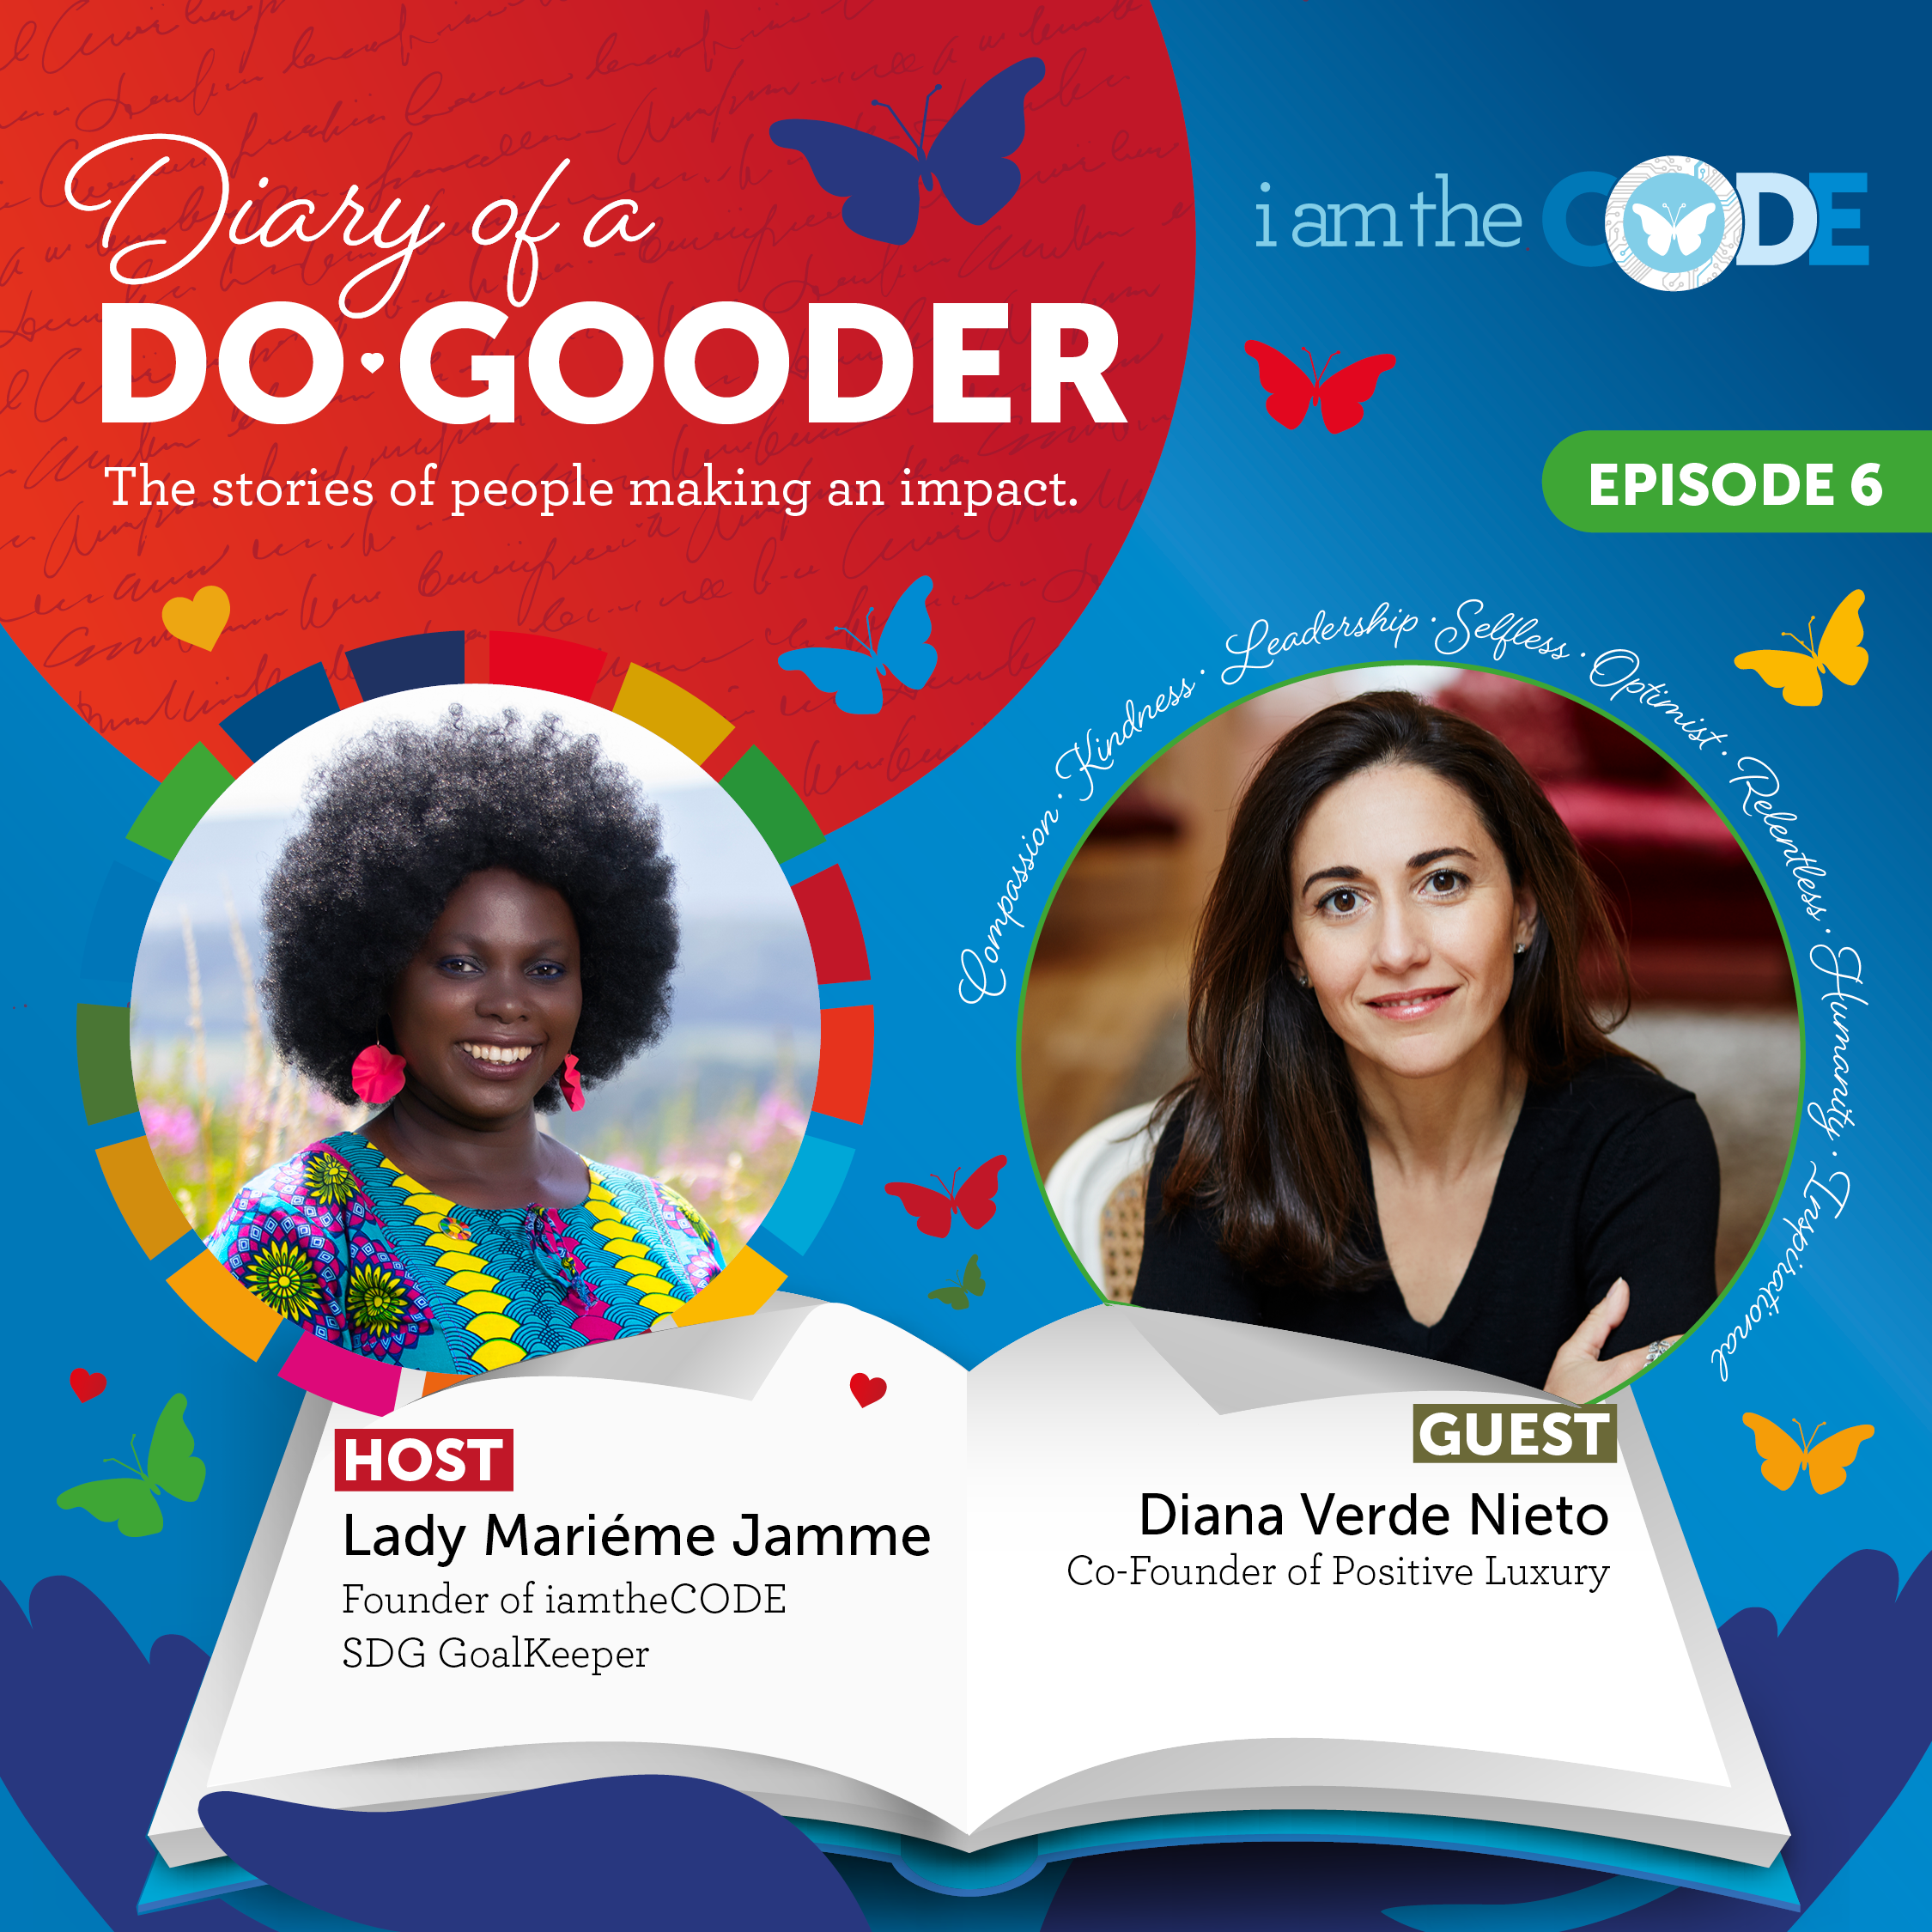 S7E6 Diary Of A Do-Gooder – ‘The Power of belonging with integrity is better.’ – Diana Verde Nieto